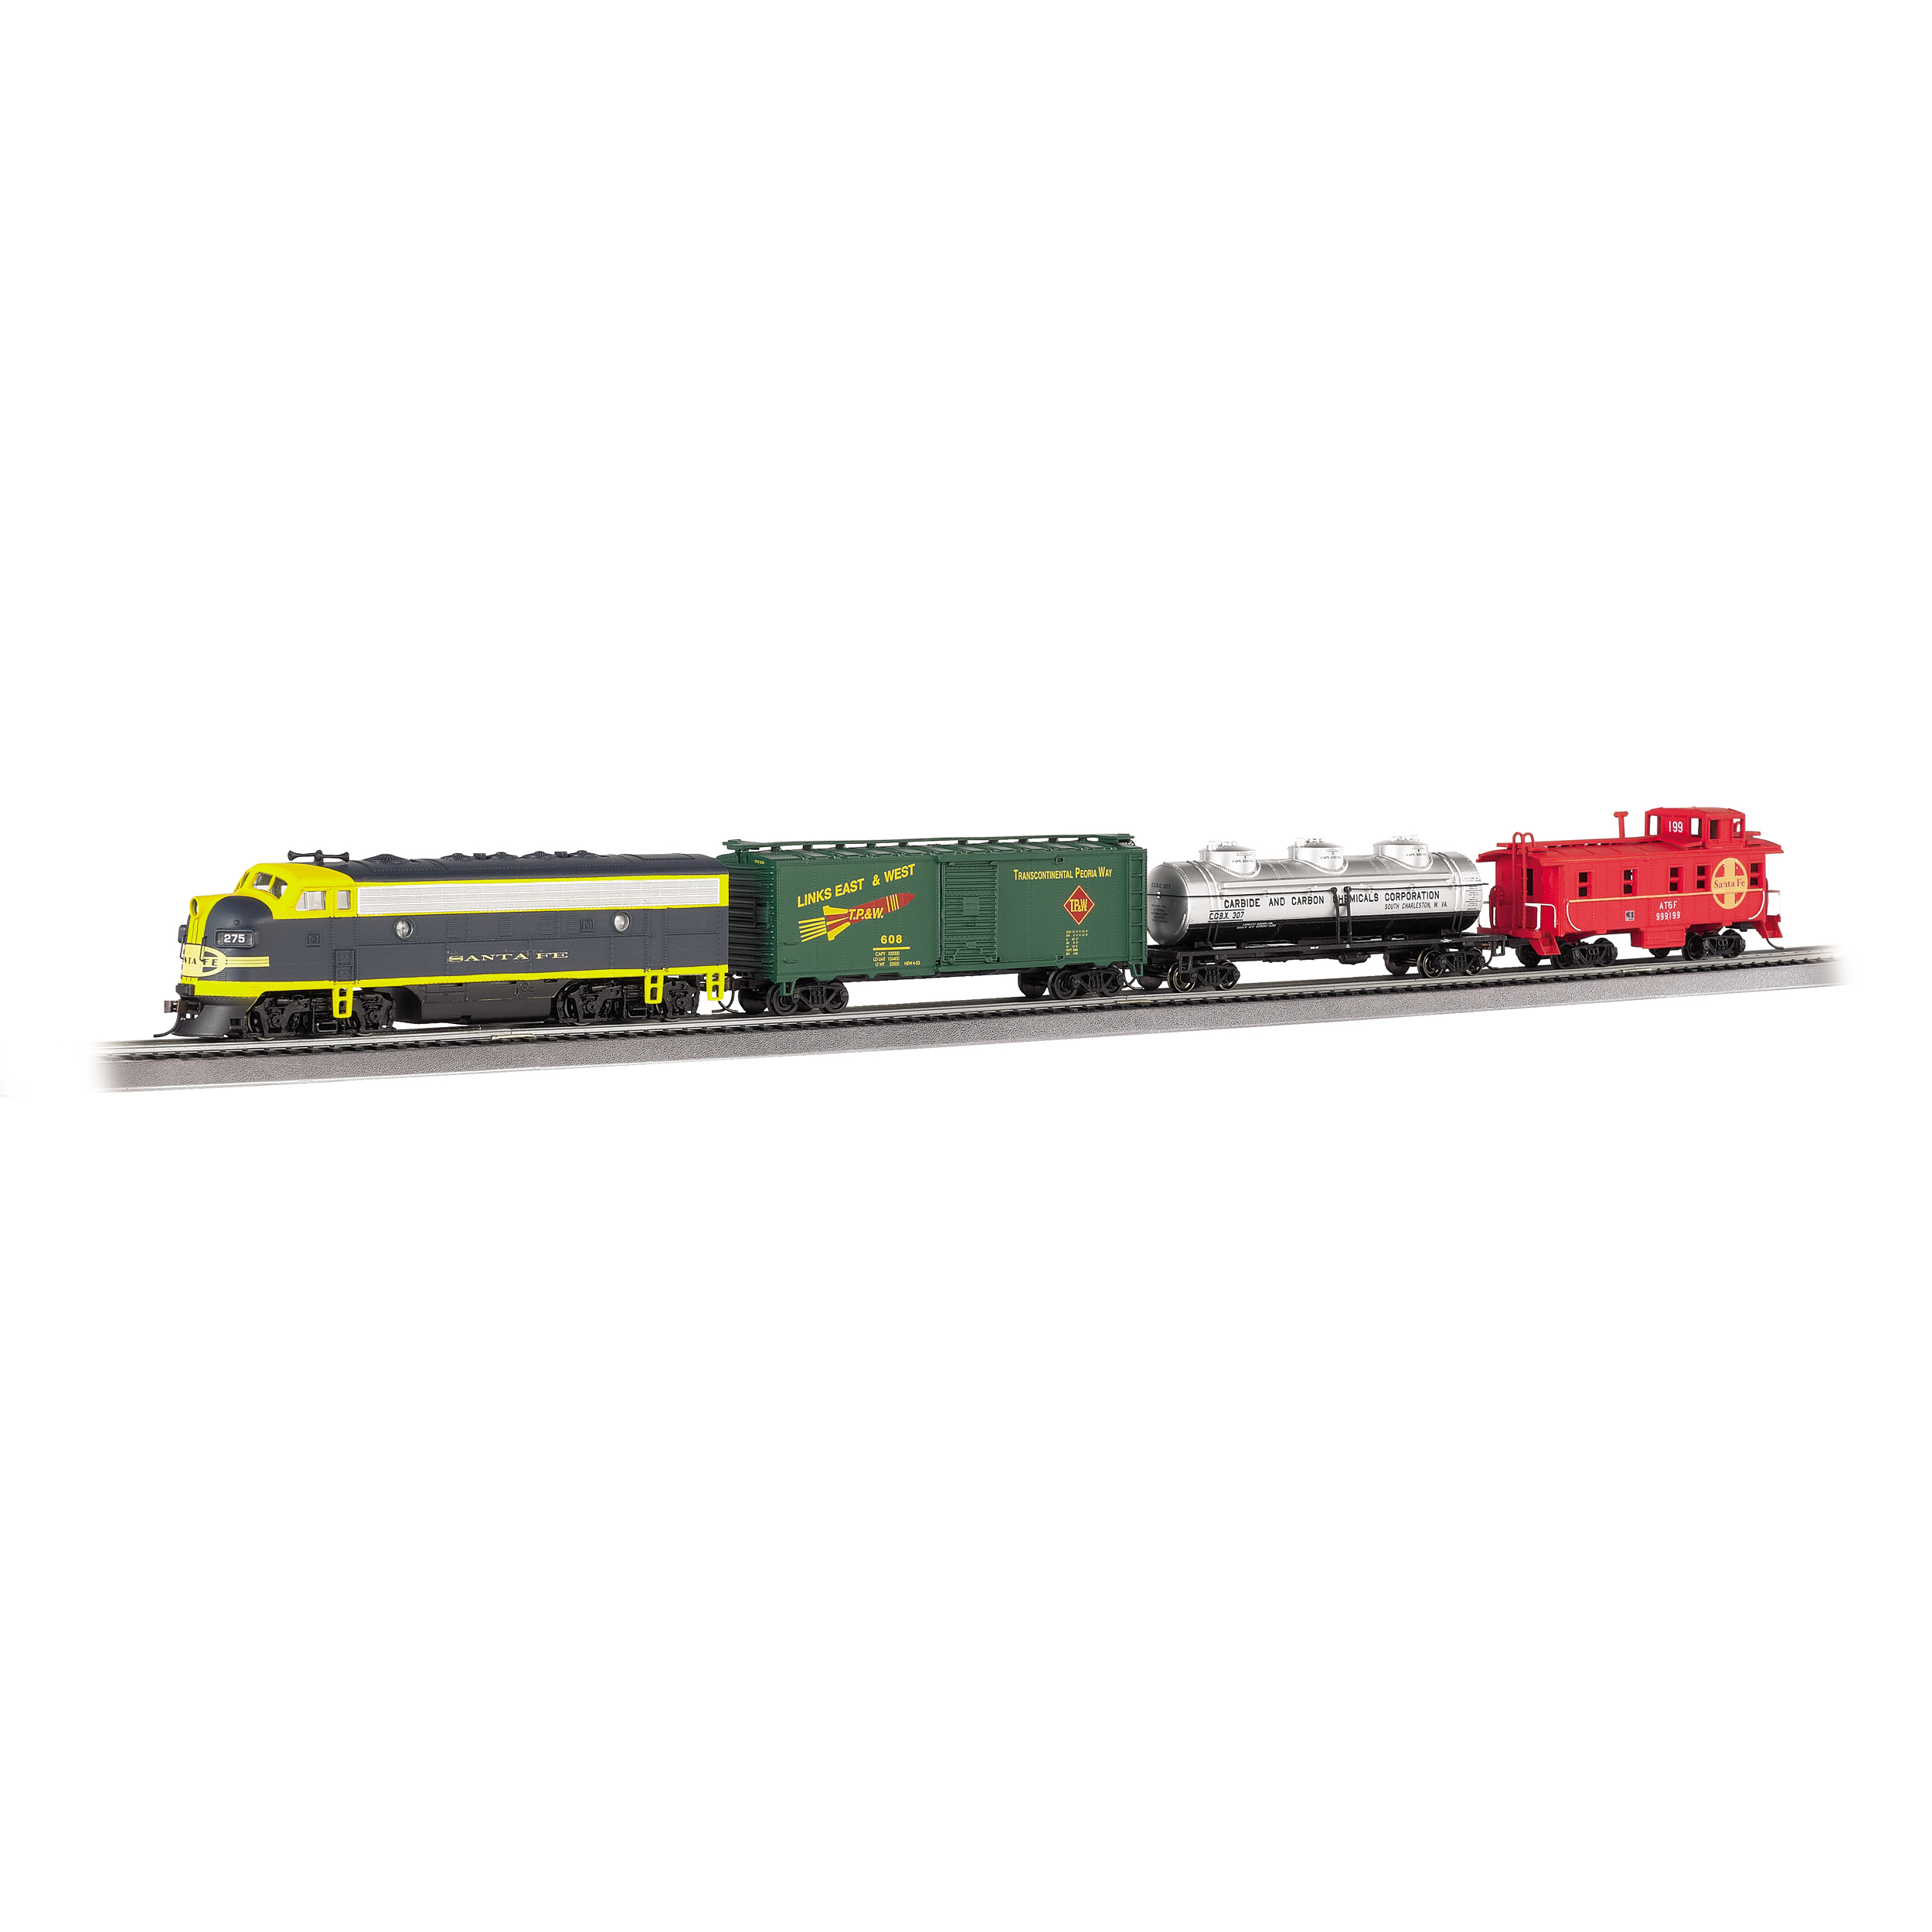 Bachmann Trains Thunder Chief Ready To Run DCC Electric Train Set with DCC Sound Locomotive HO Scale